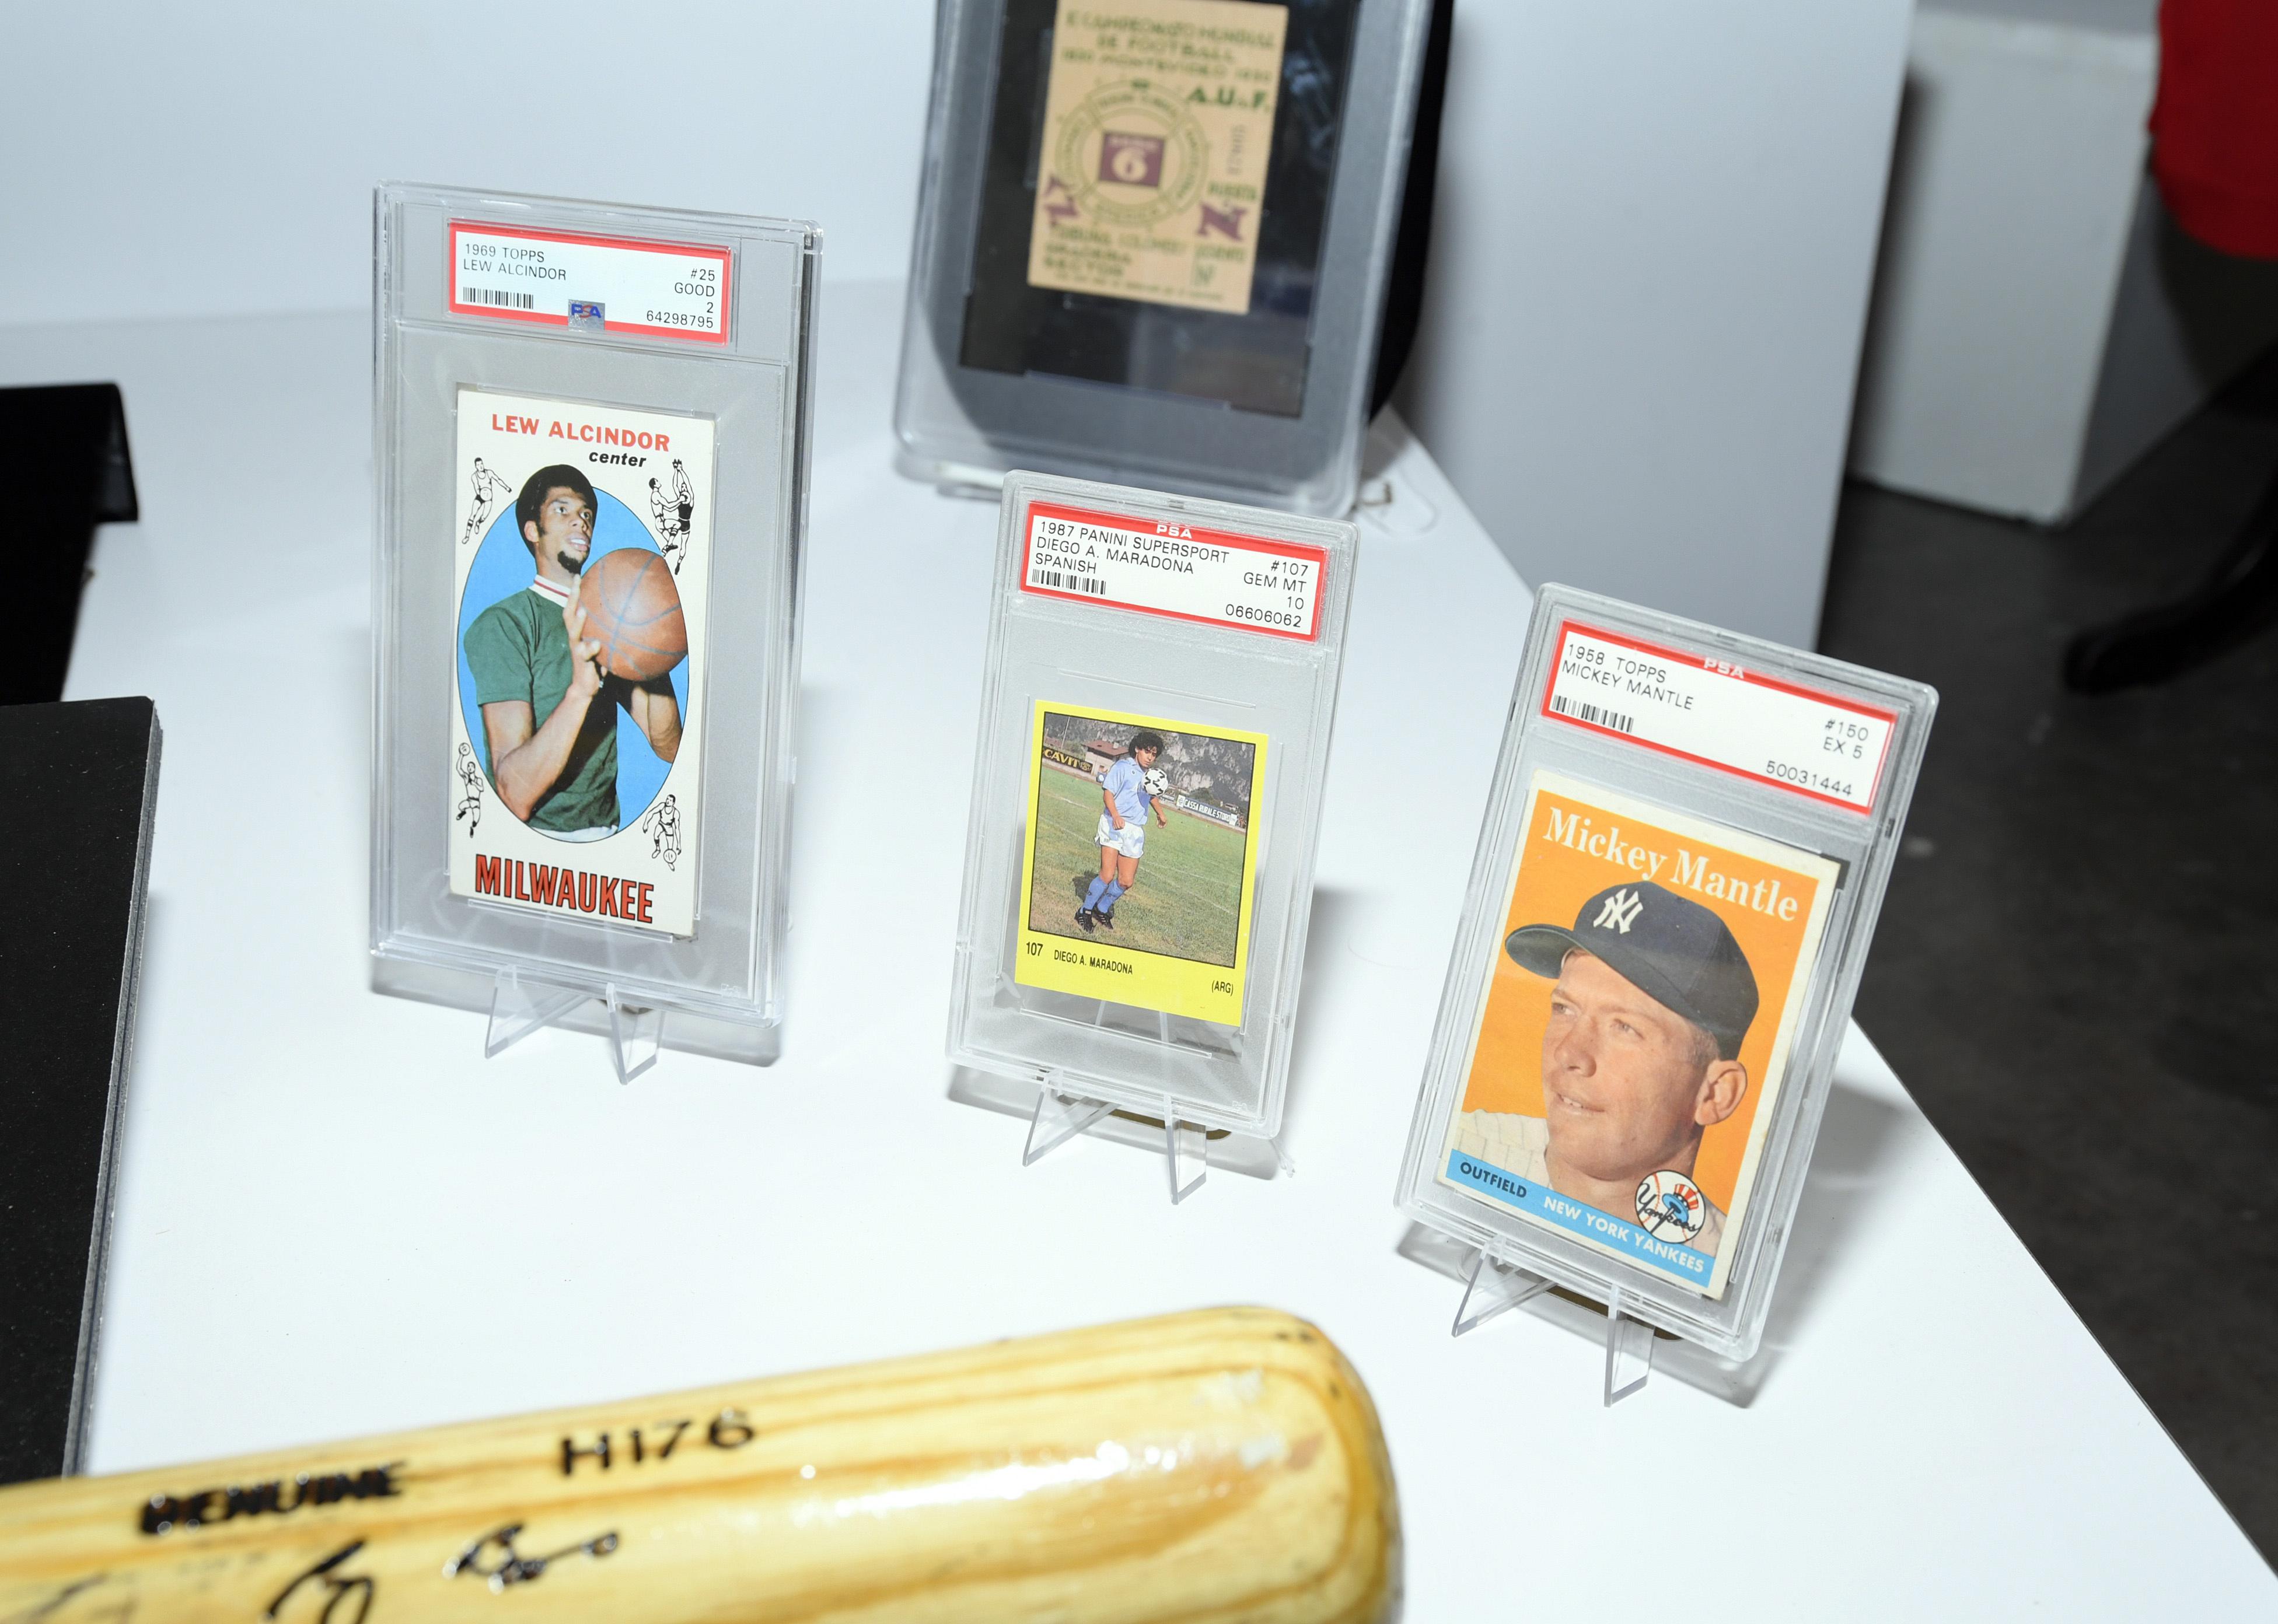 Trading cards of Lew Alcindor (now Kareem Abdul-Jabbar), Diego Maradona and Mickey Mantle are displayed during Julian's Auctions Sports Legends press preview on a table.